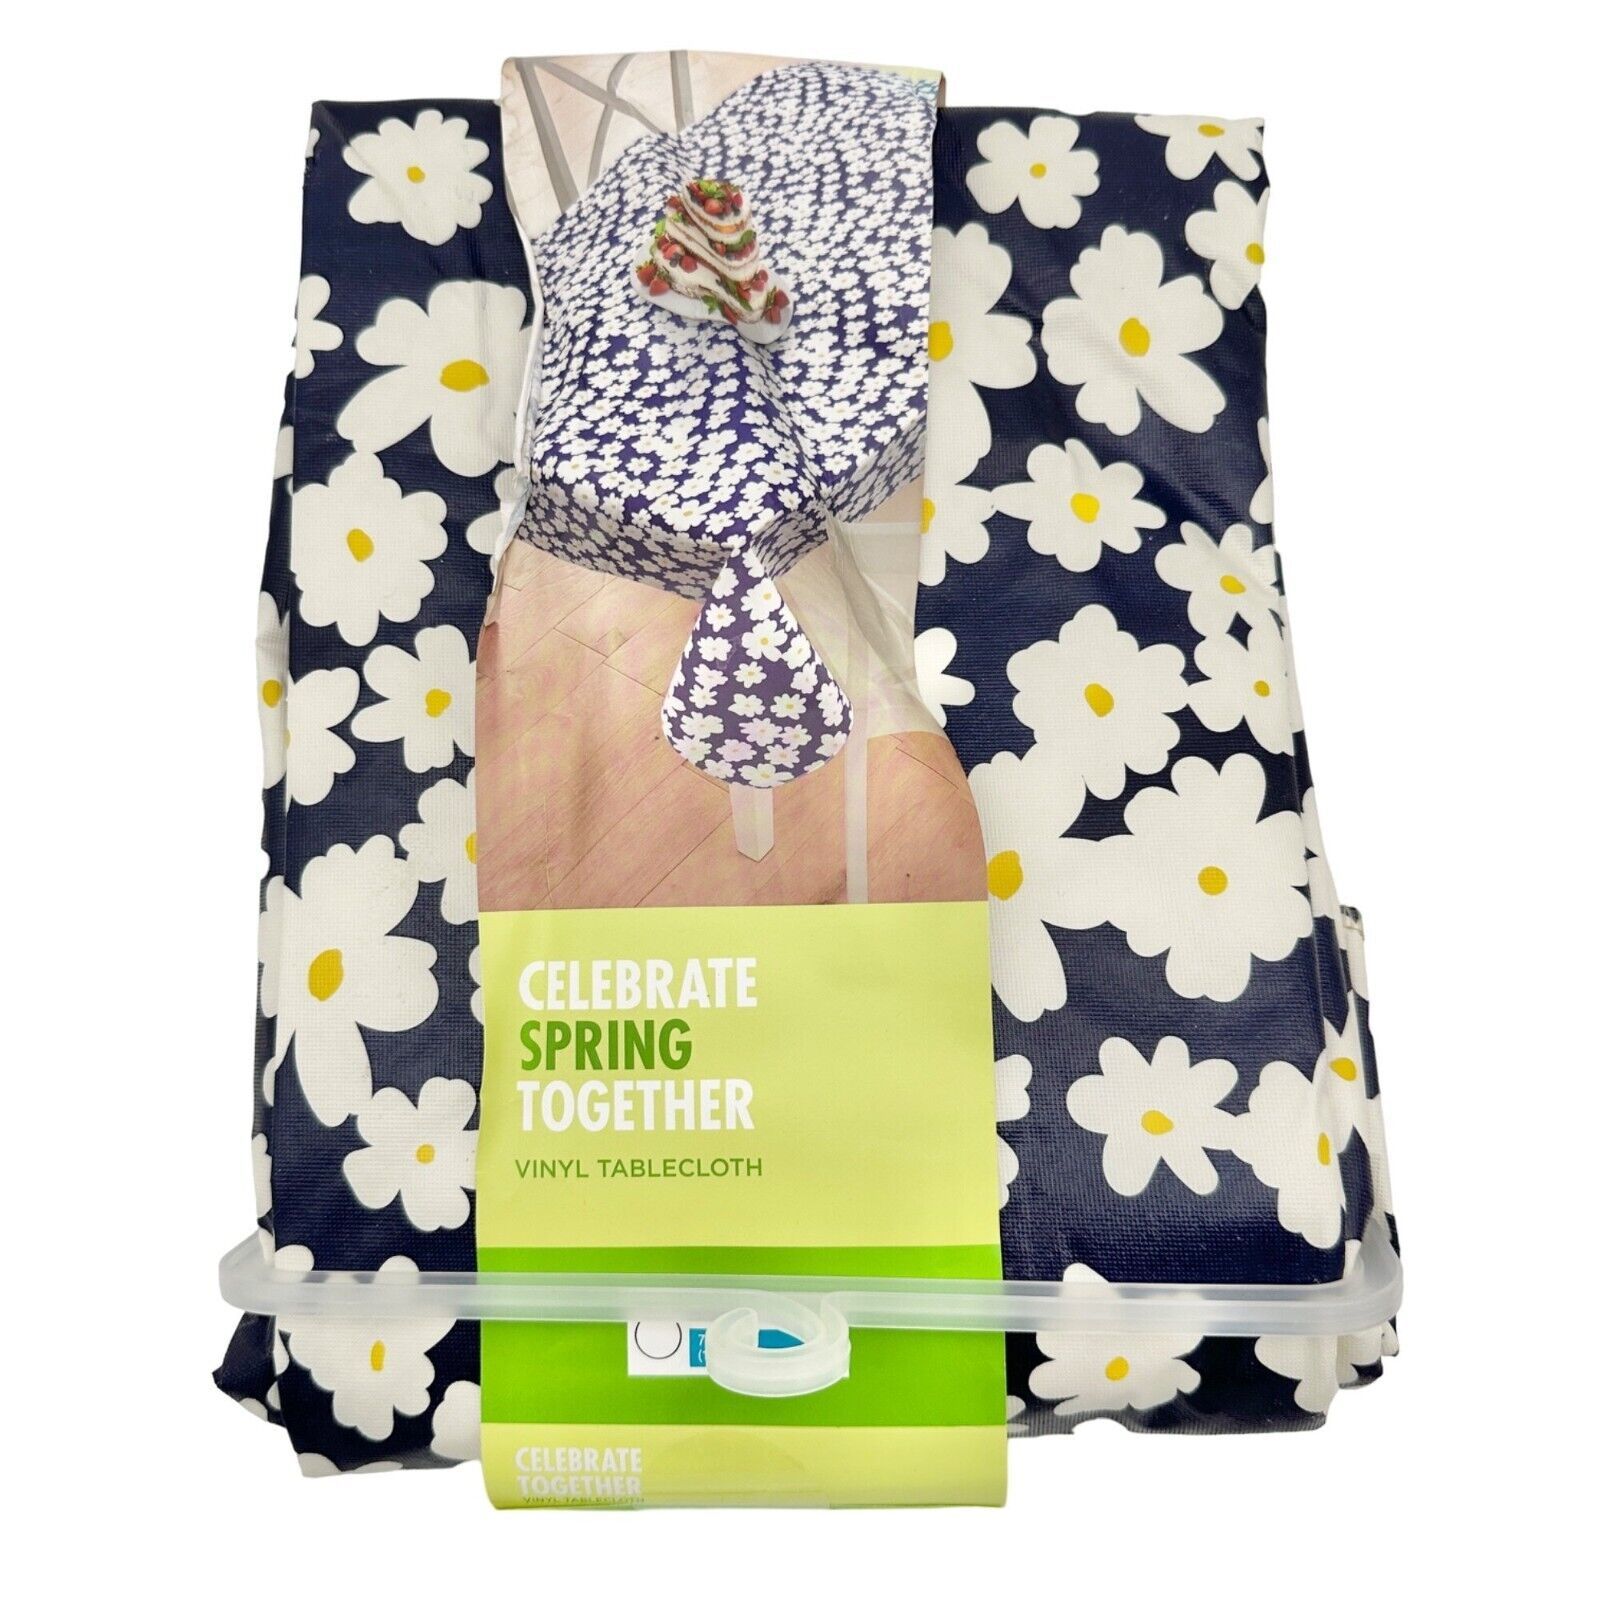 Kohl's Celebrate Spring Together Vinyl Tablecloth 70in Round Blue White Flowers - $14.85